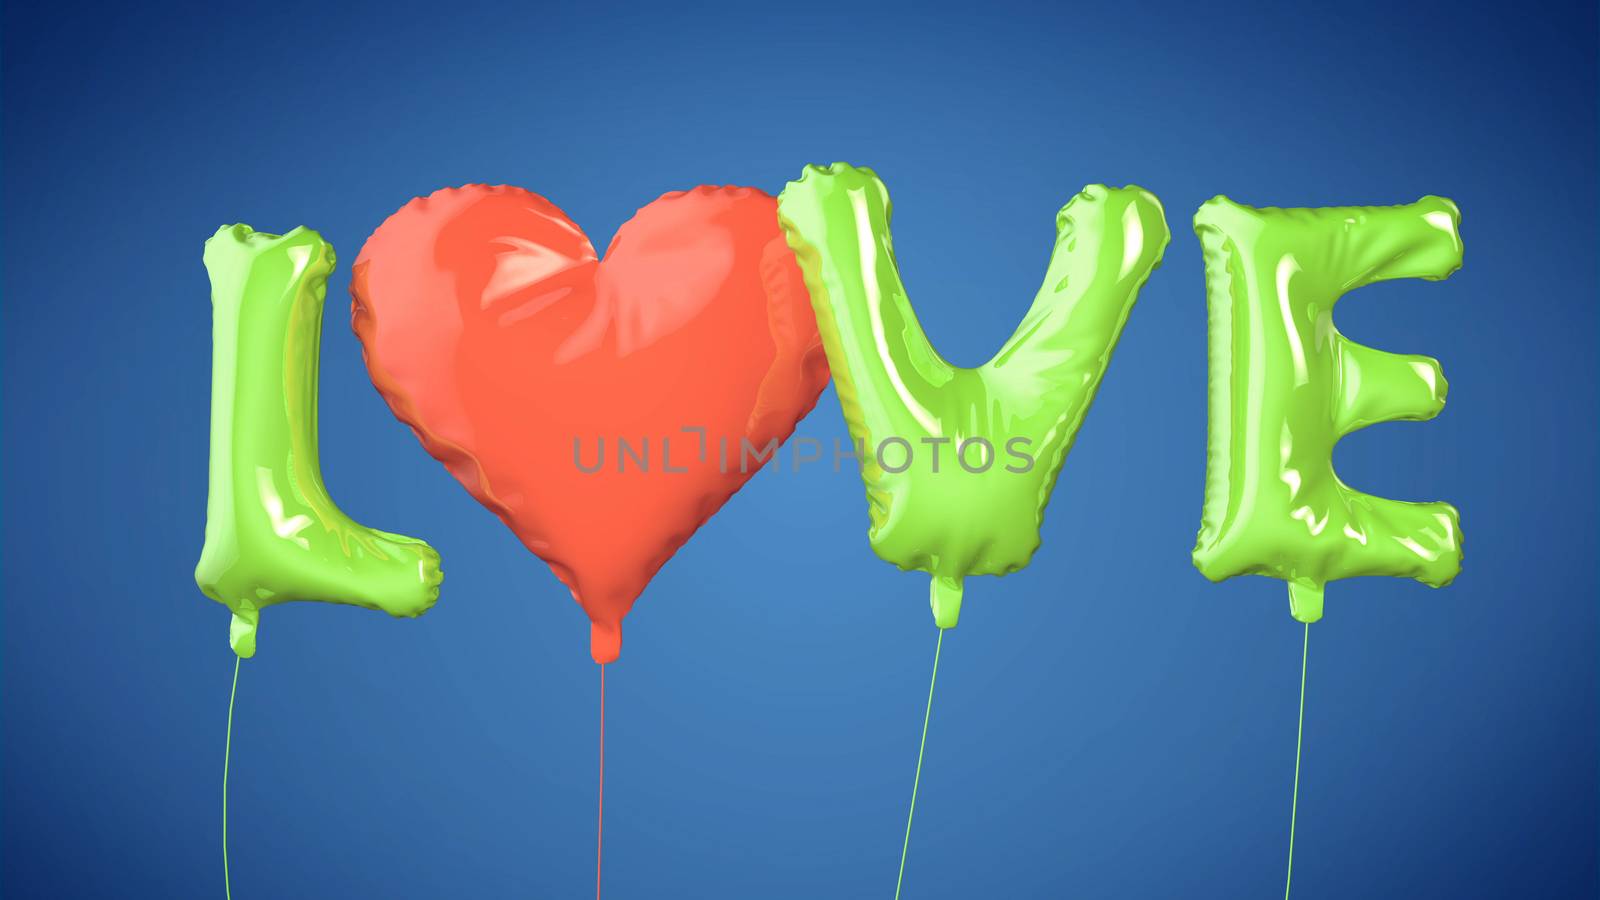 Balloons create LOVE word on blue background.